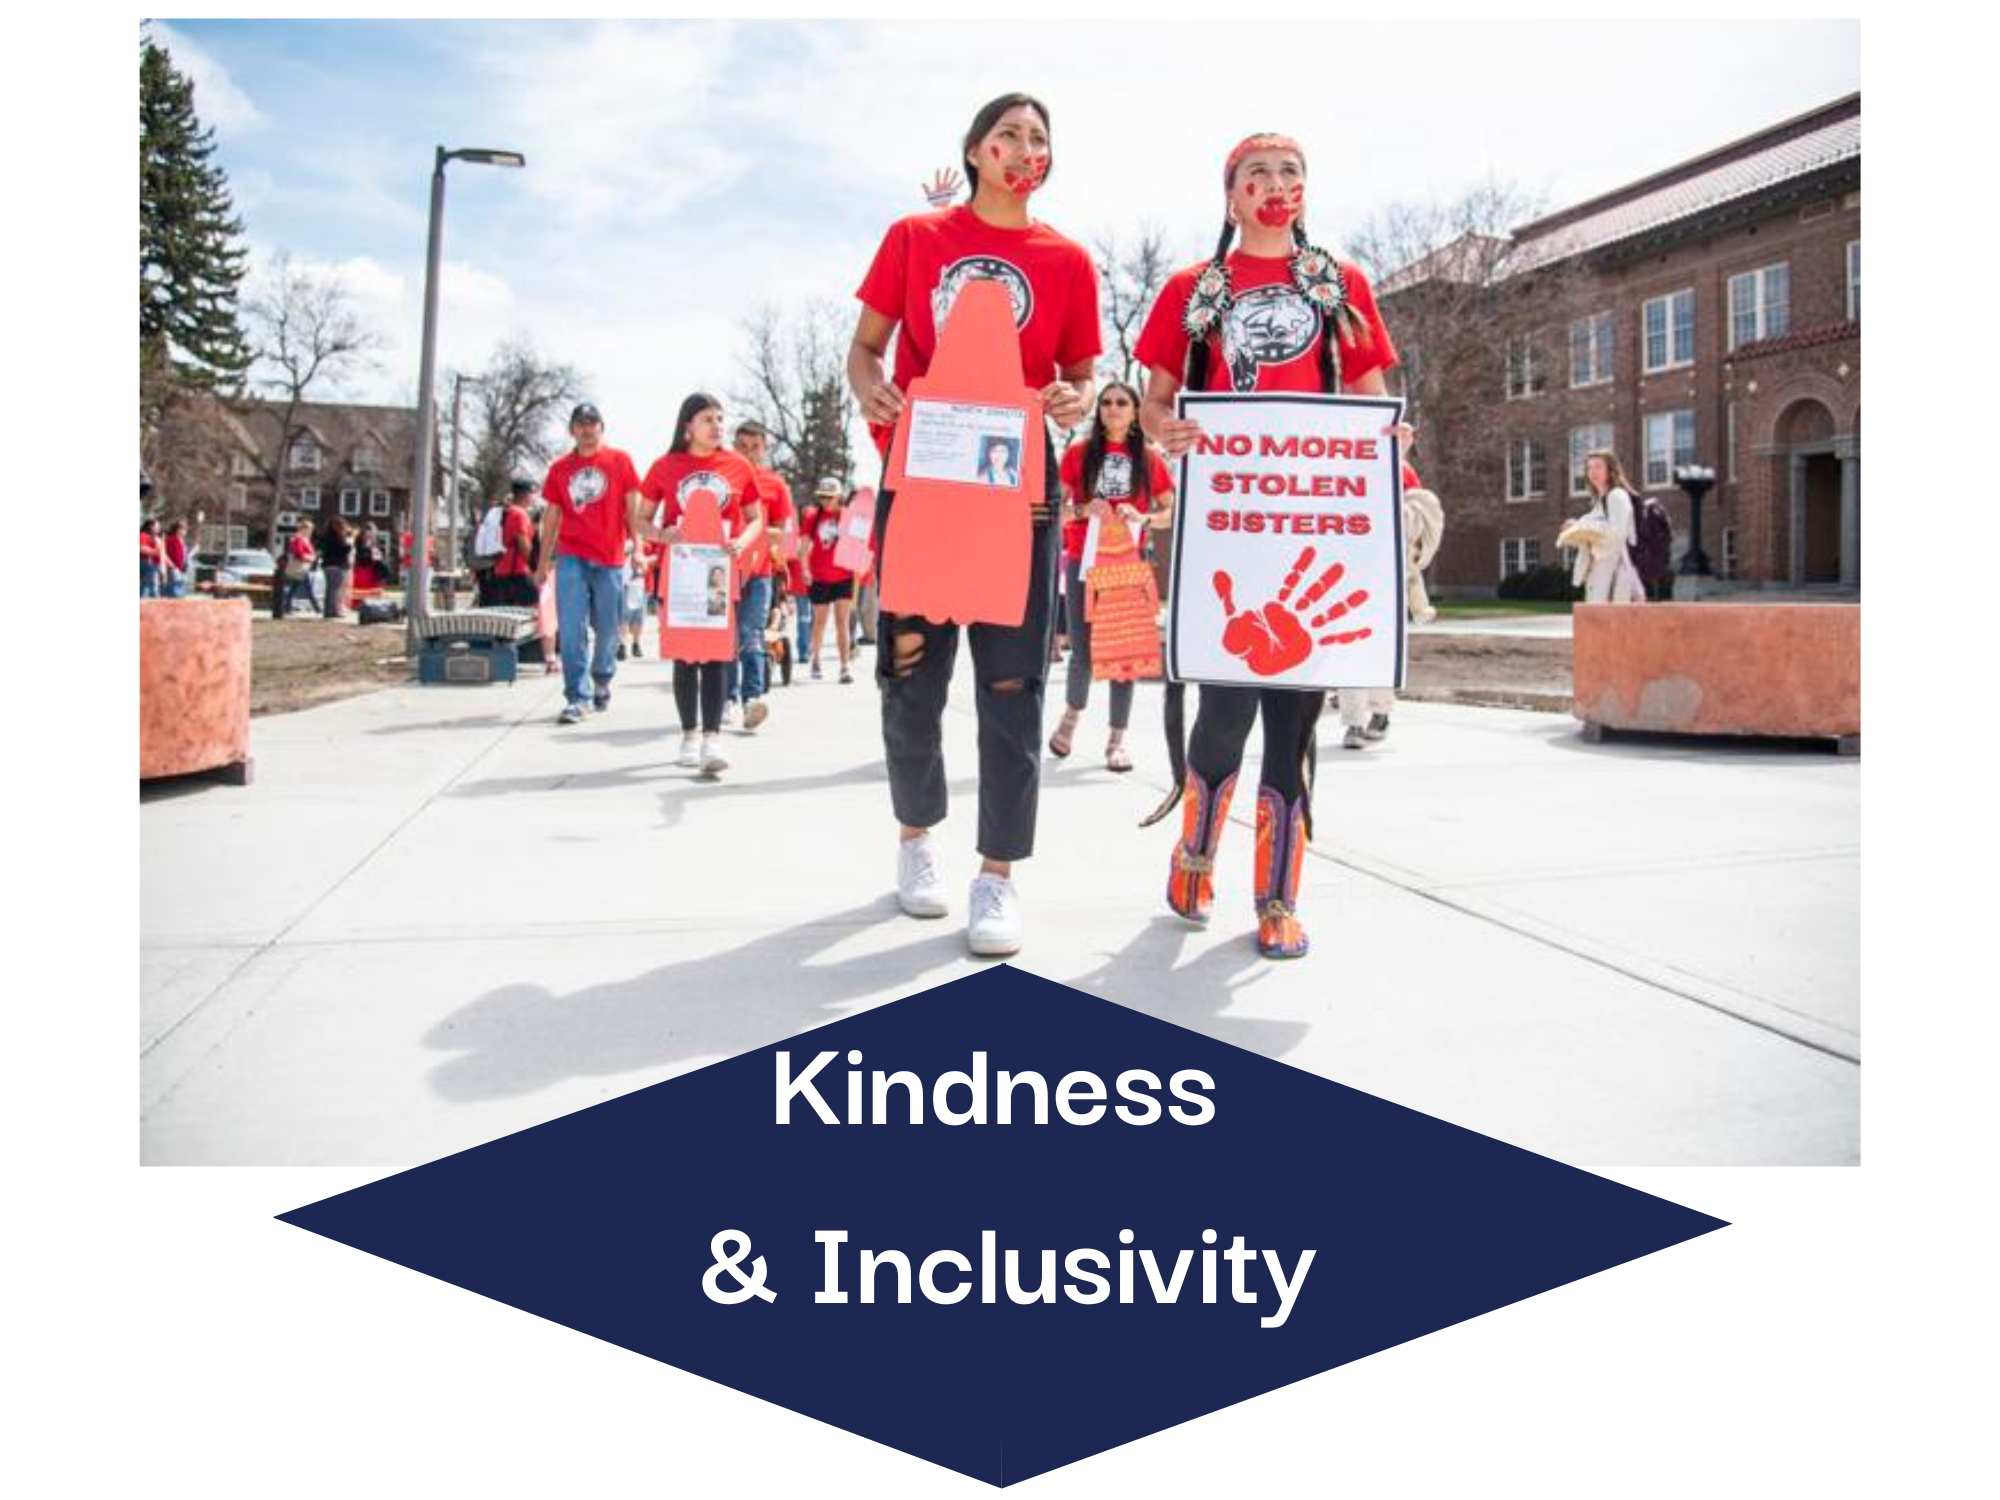 Kindness and Inclusivity, taken from the cultural values model showing students showing out at our Missing and Murdered Indigenous People event.